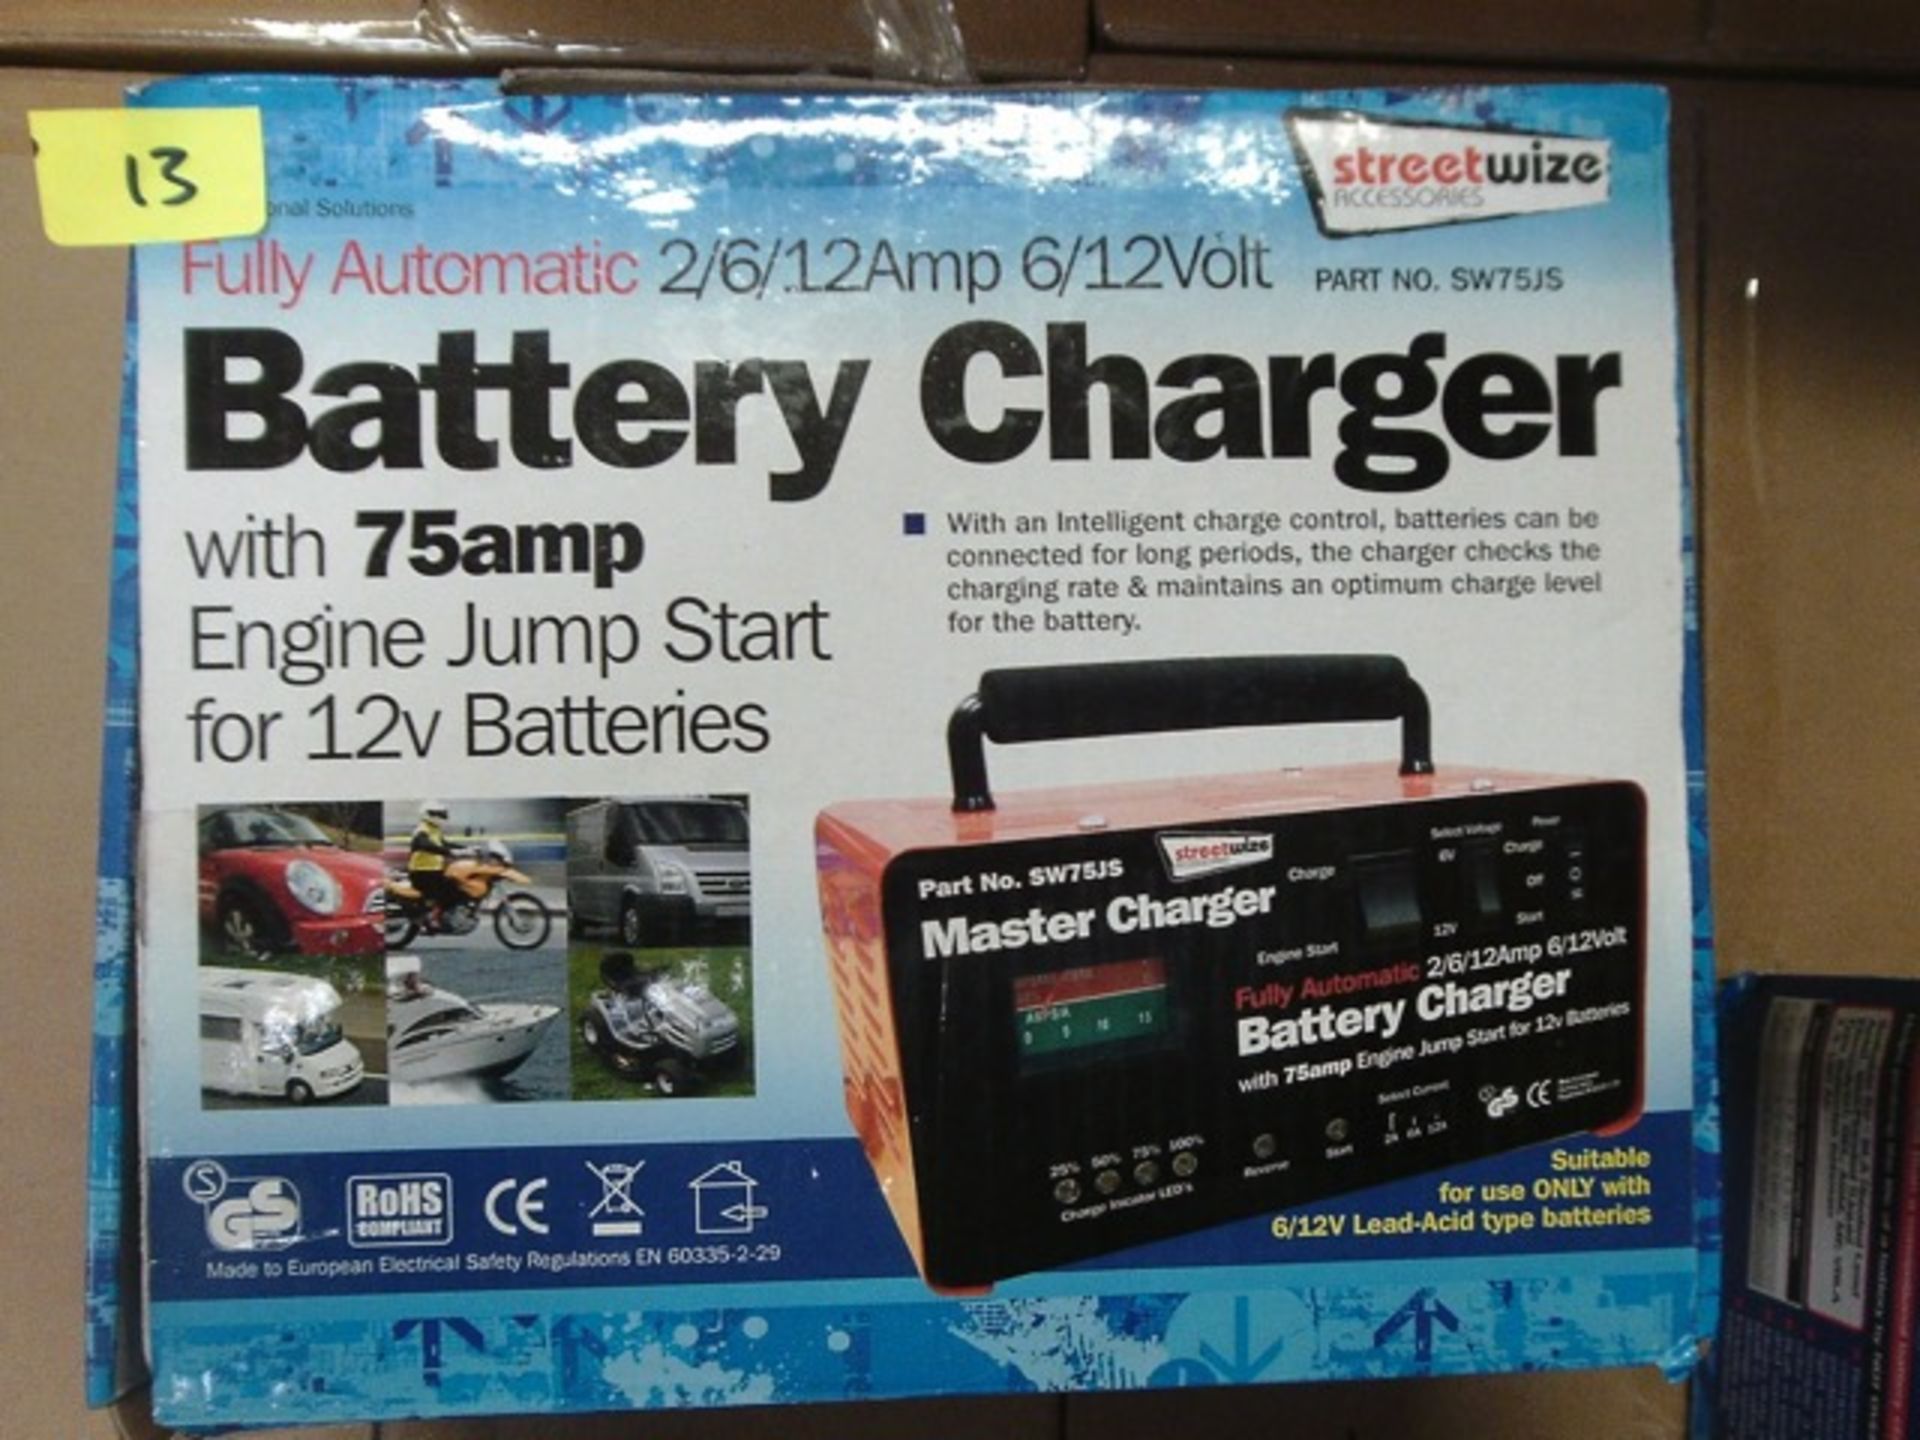 Streetwise Fully auctomatic 2/6/12Amp - 6/12Volt Fully automatic battery charger - with 75Amp jump